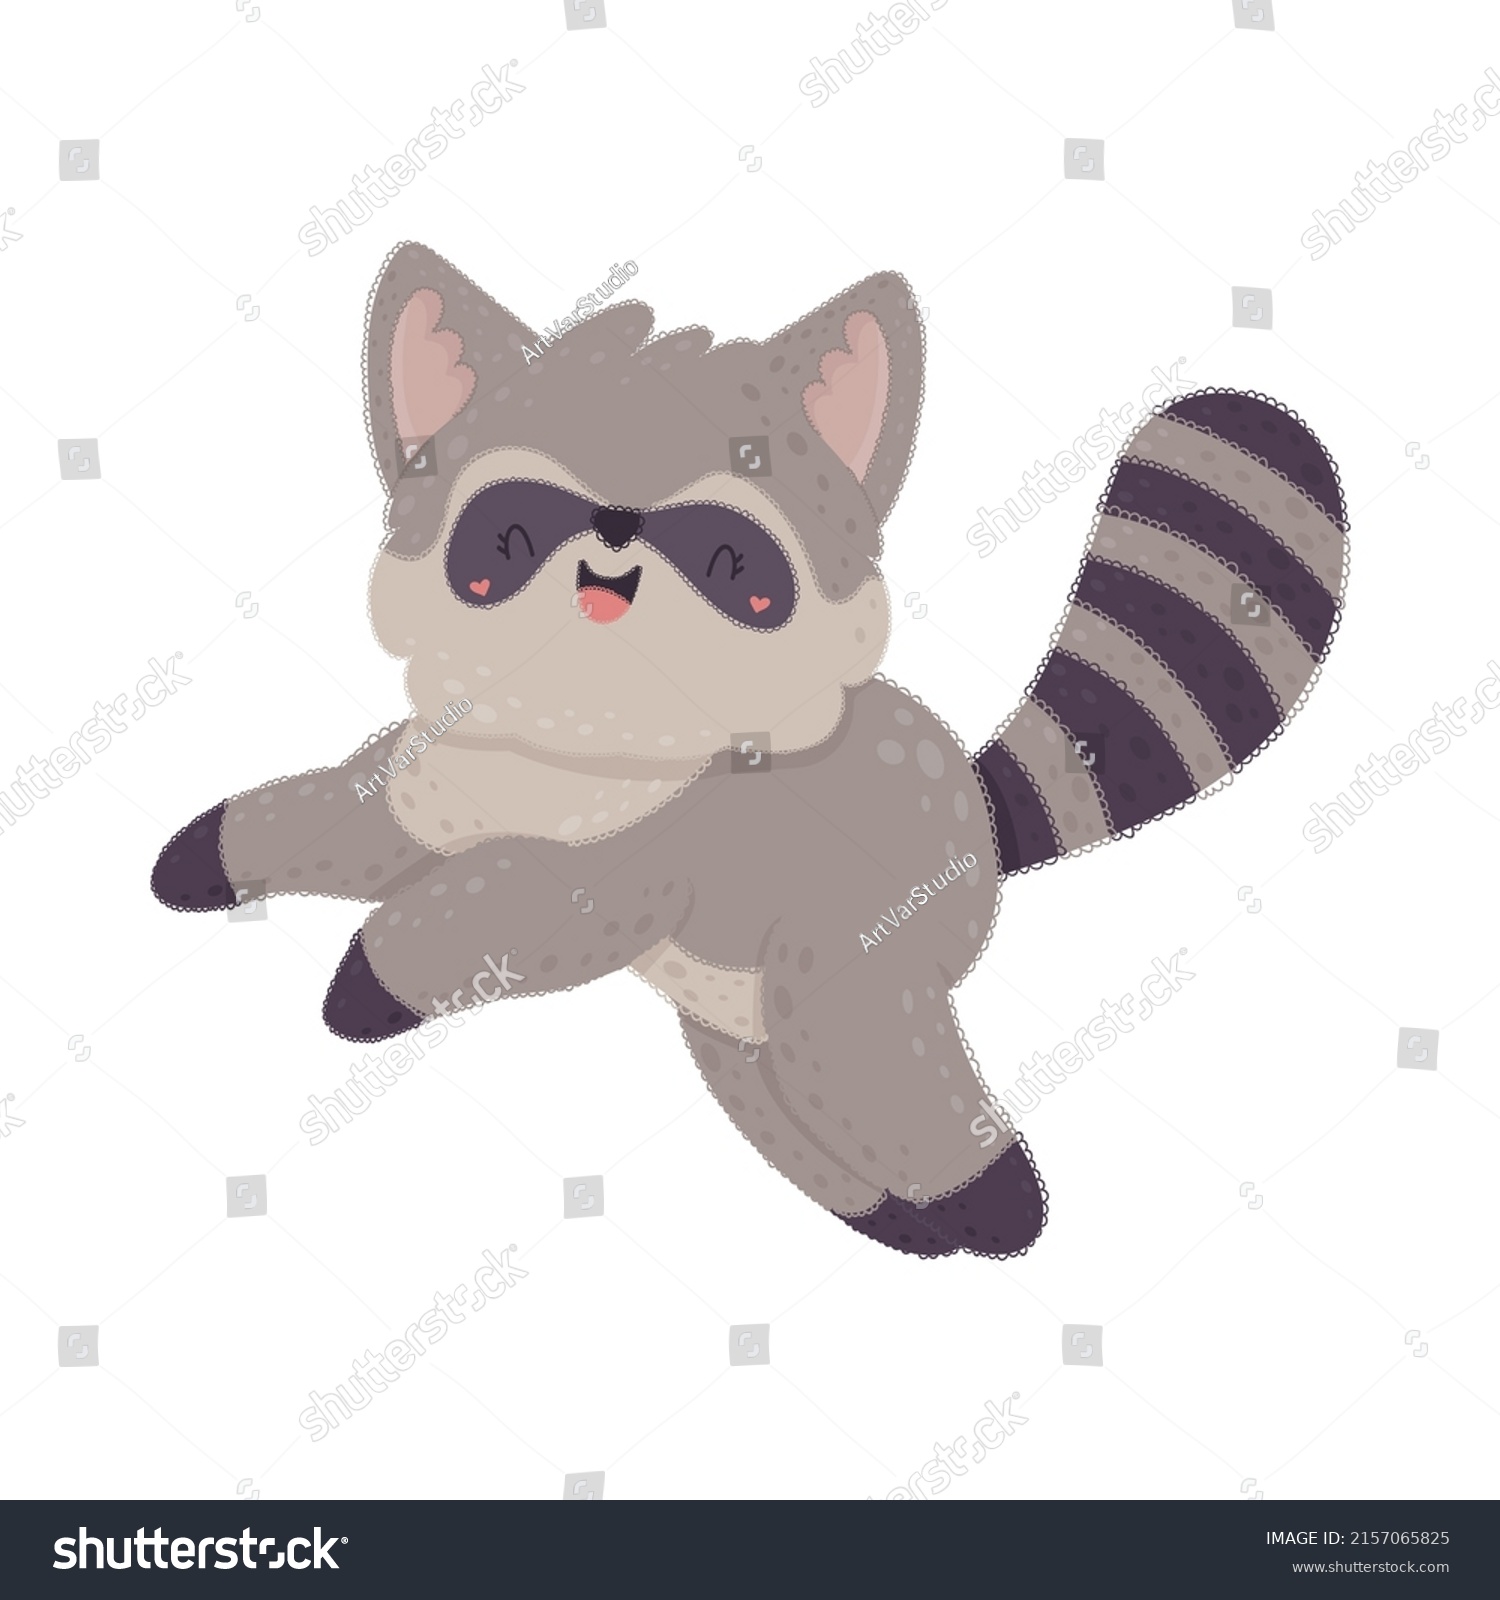 SVG of Watercolor raccoon in cartoon style. Vector illustration of a cute animal. Cute little illustration of racoon for kids, baby book, fairy tales, covers, baby shower invitation, textile t-shirt. svg